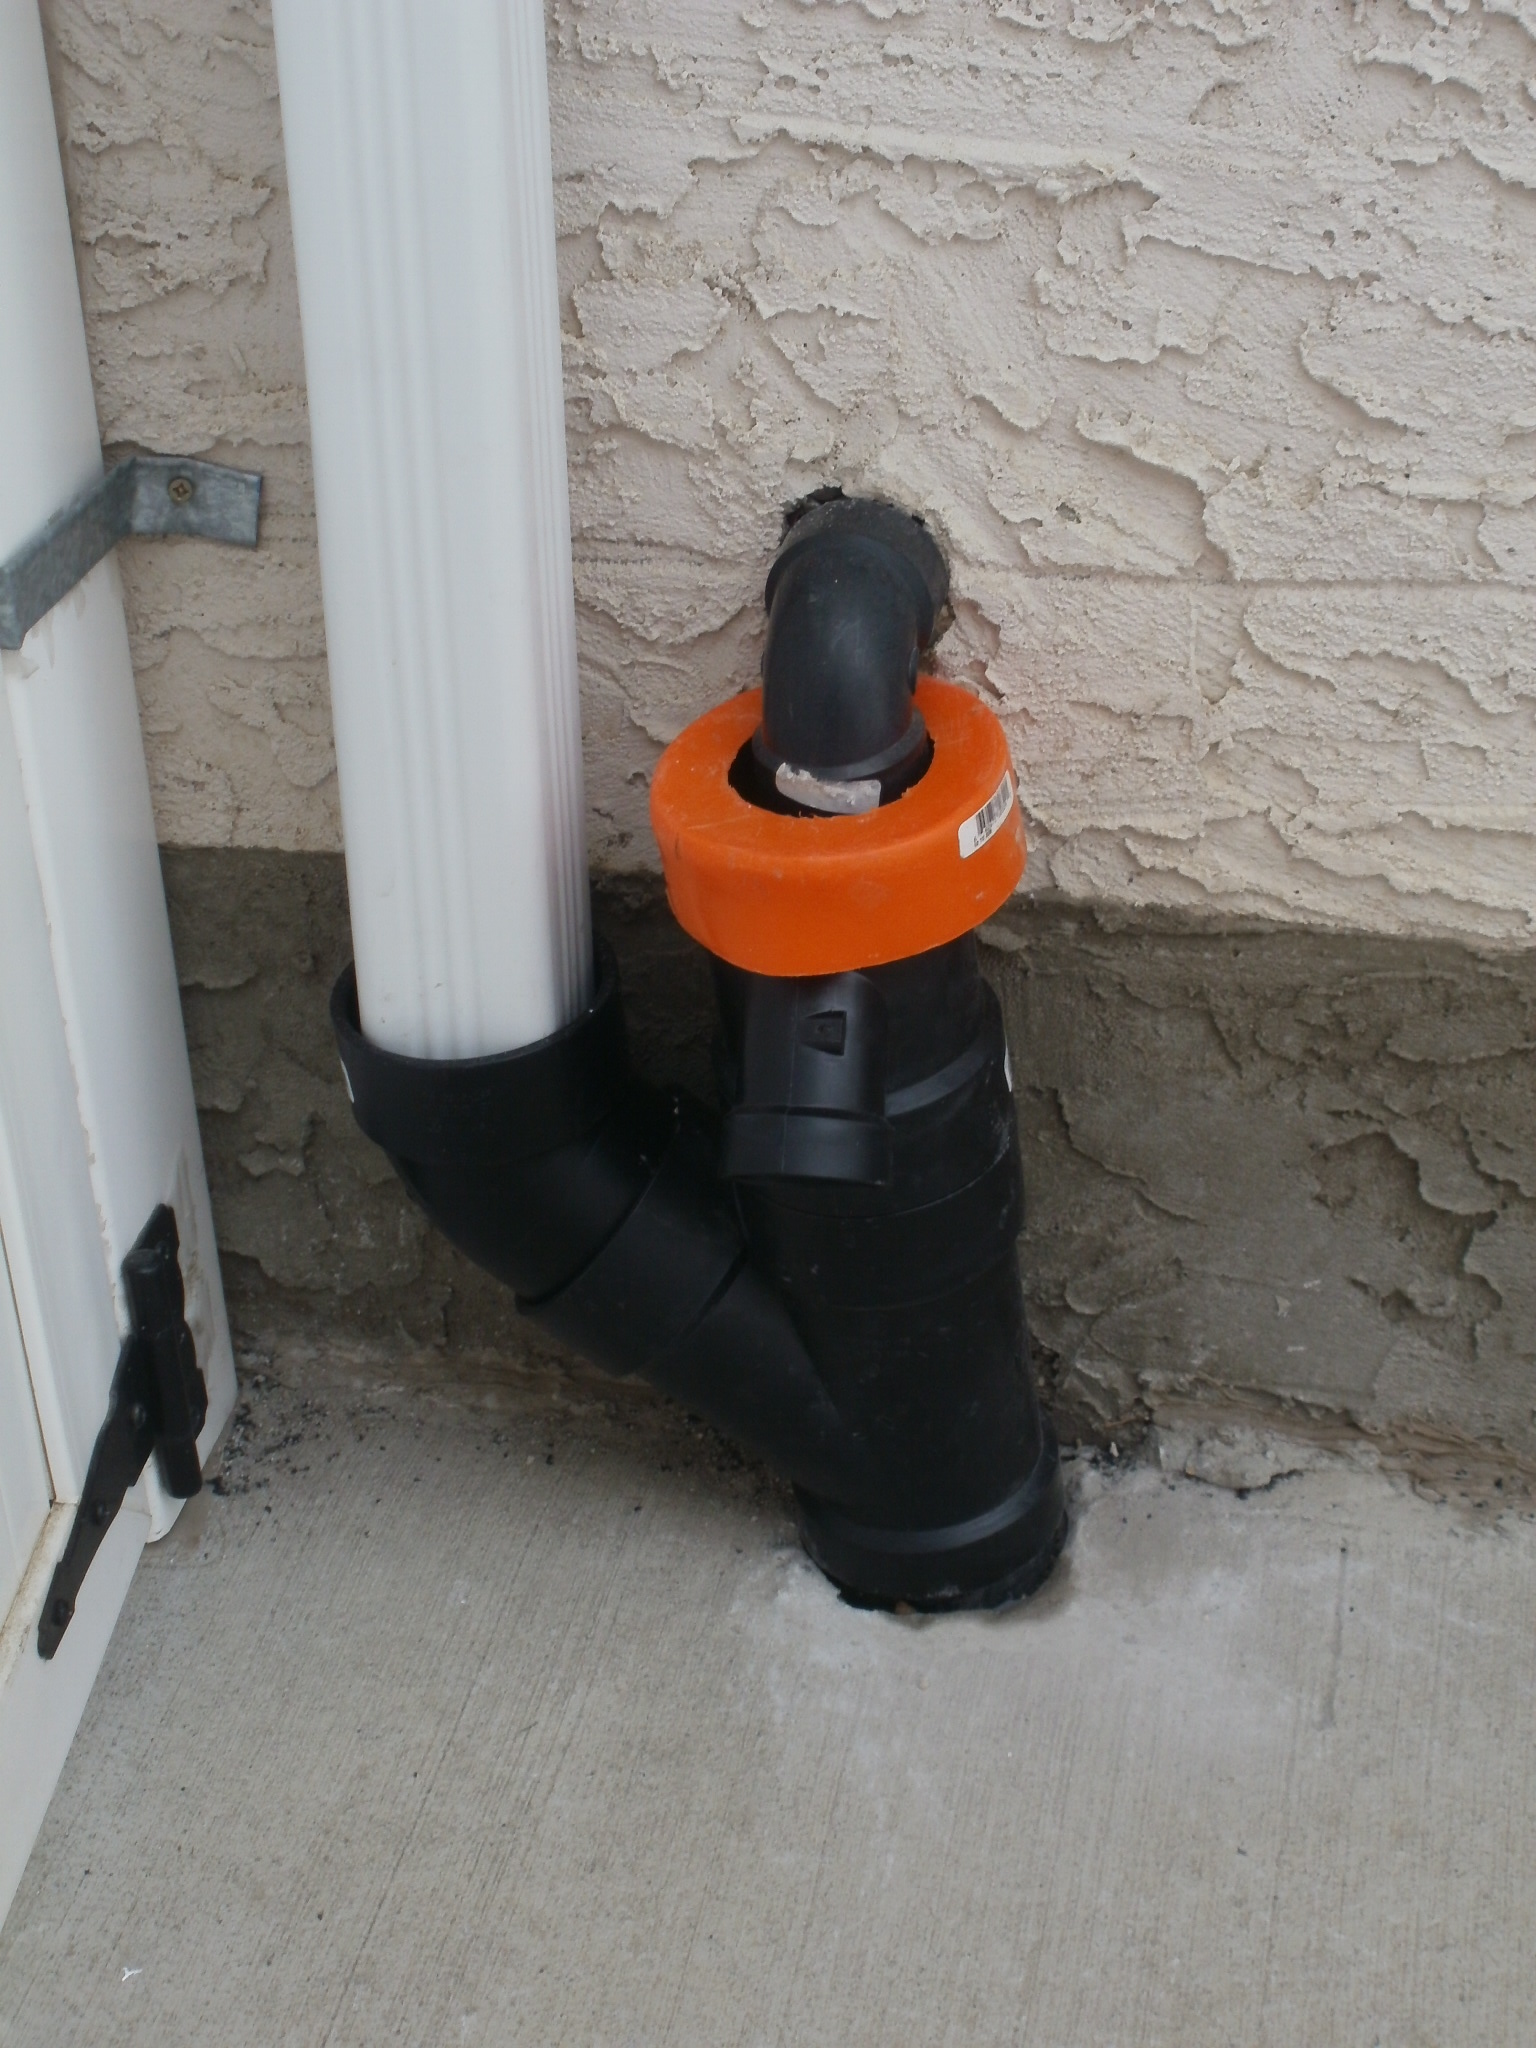 Downspout and Sump Pump Discharge to Storm Service Connection